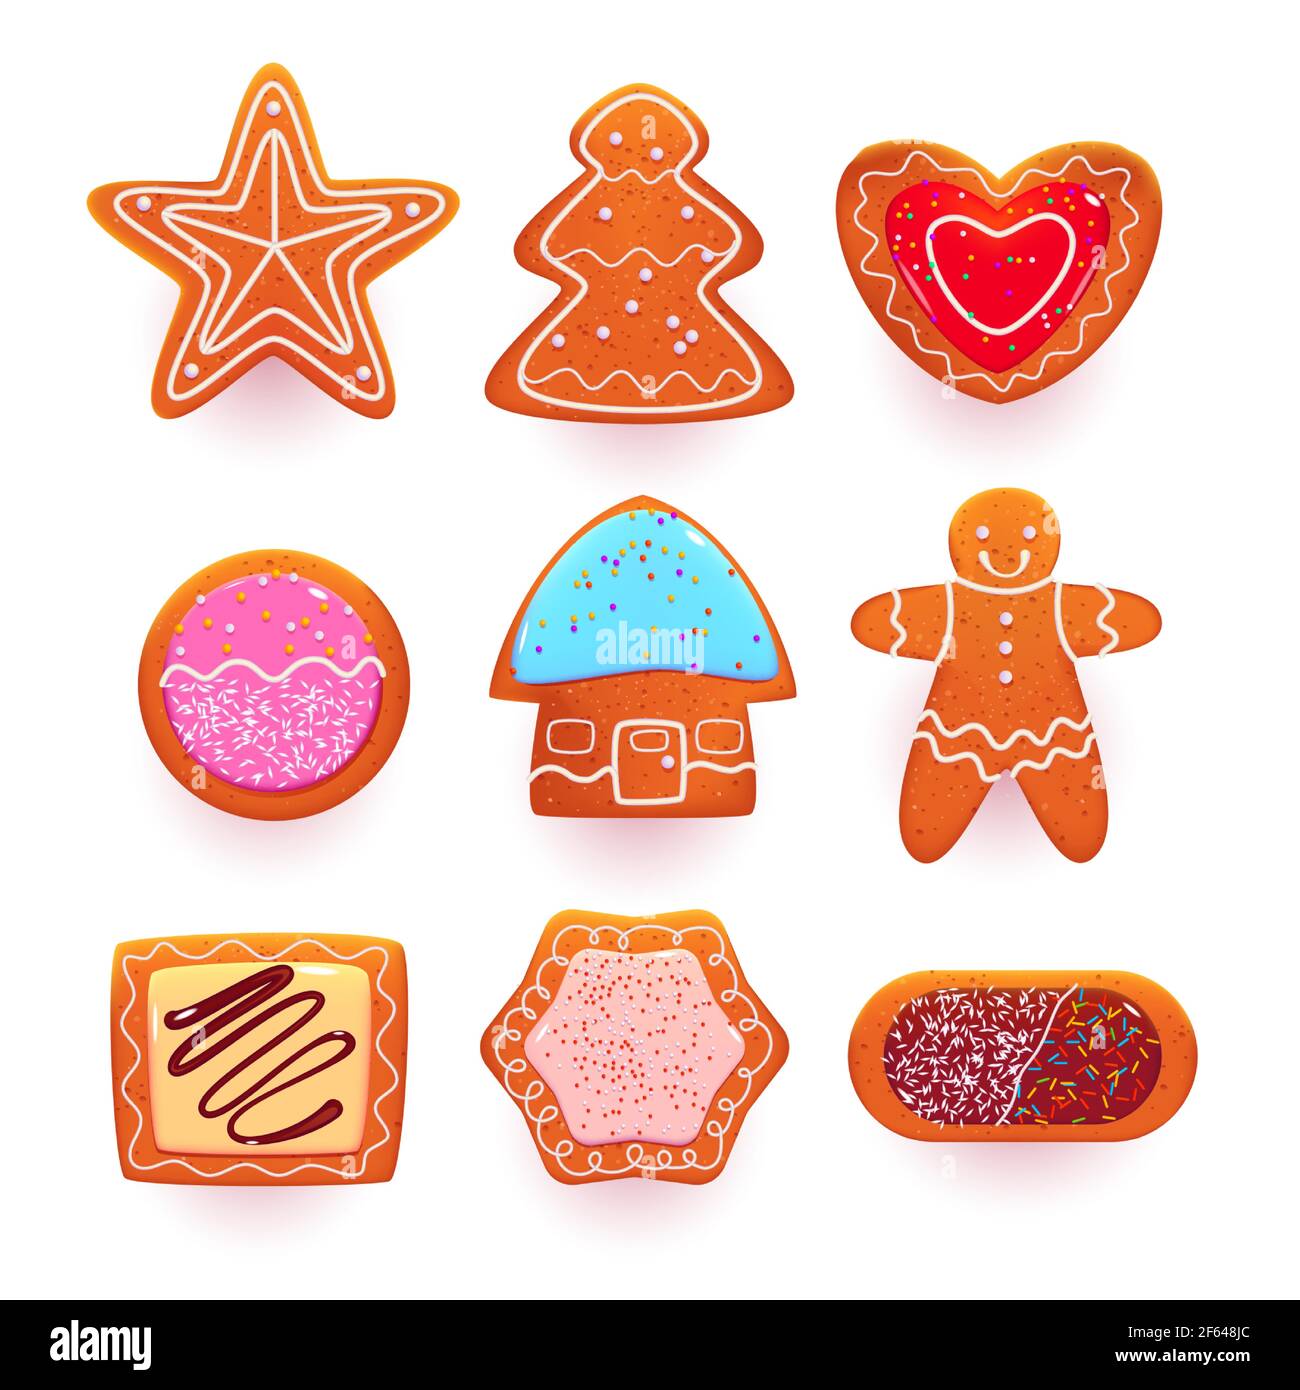 Gingerbread cookies, cartoon sweets in shape of star, christmas tree and heart, ginger man and house. Decorated pastry with icing and sprinkles isolated on white background, Vector illustration, set Stock Vector